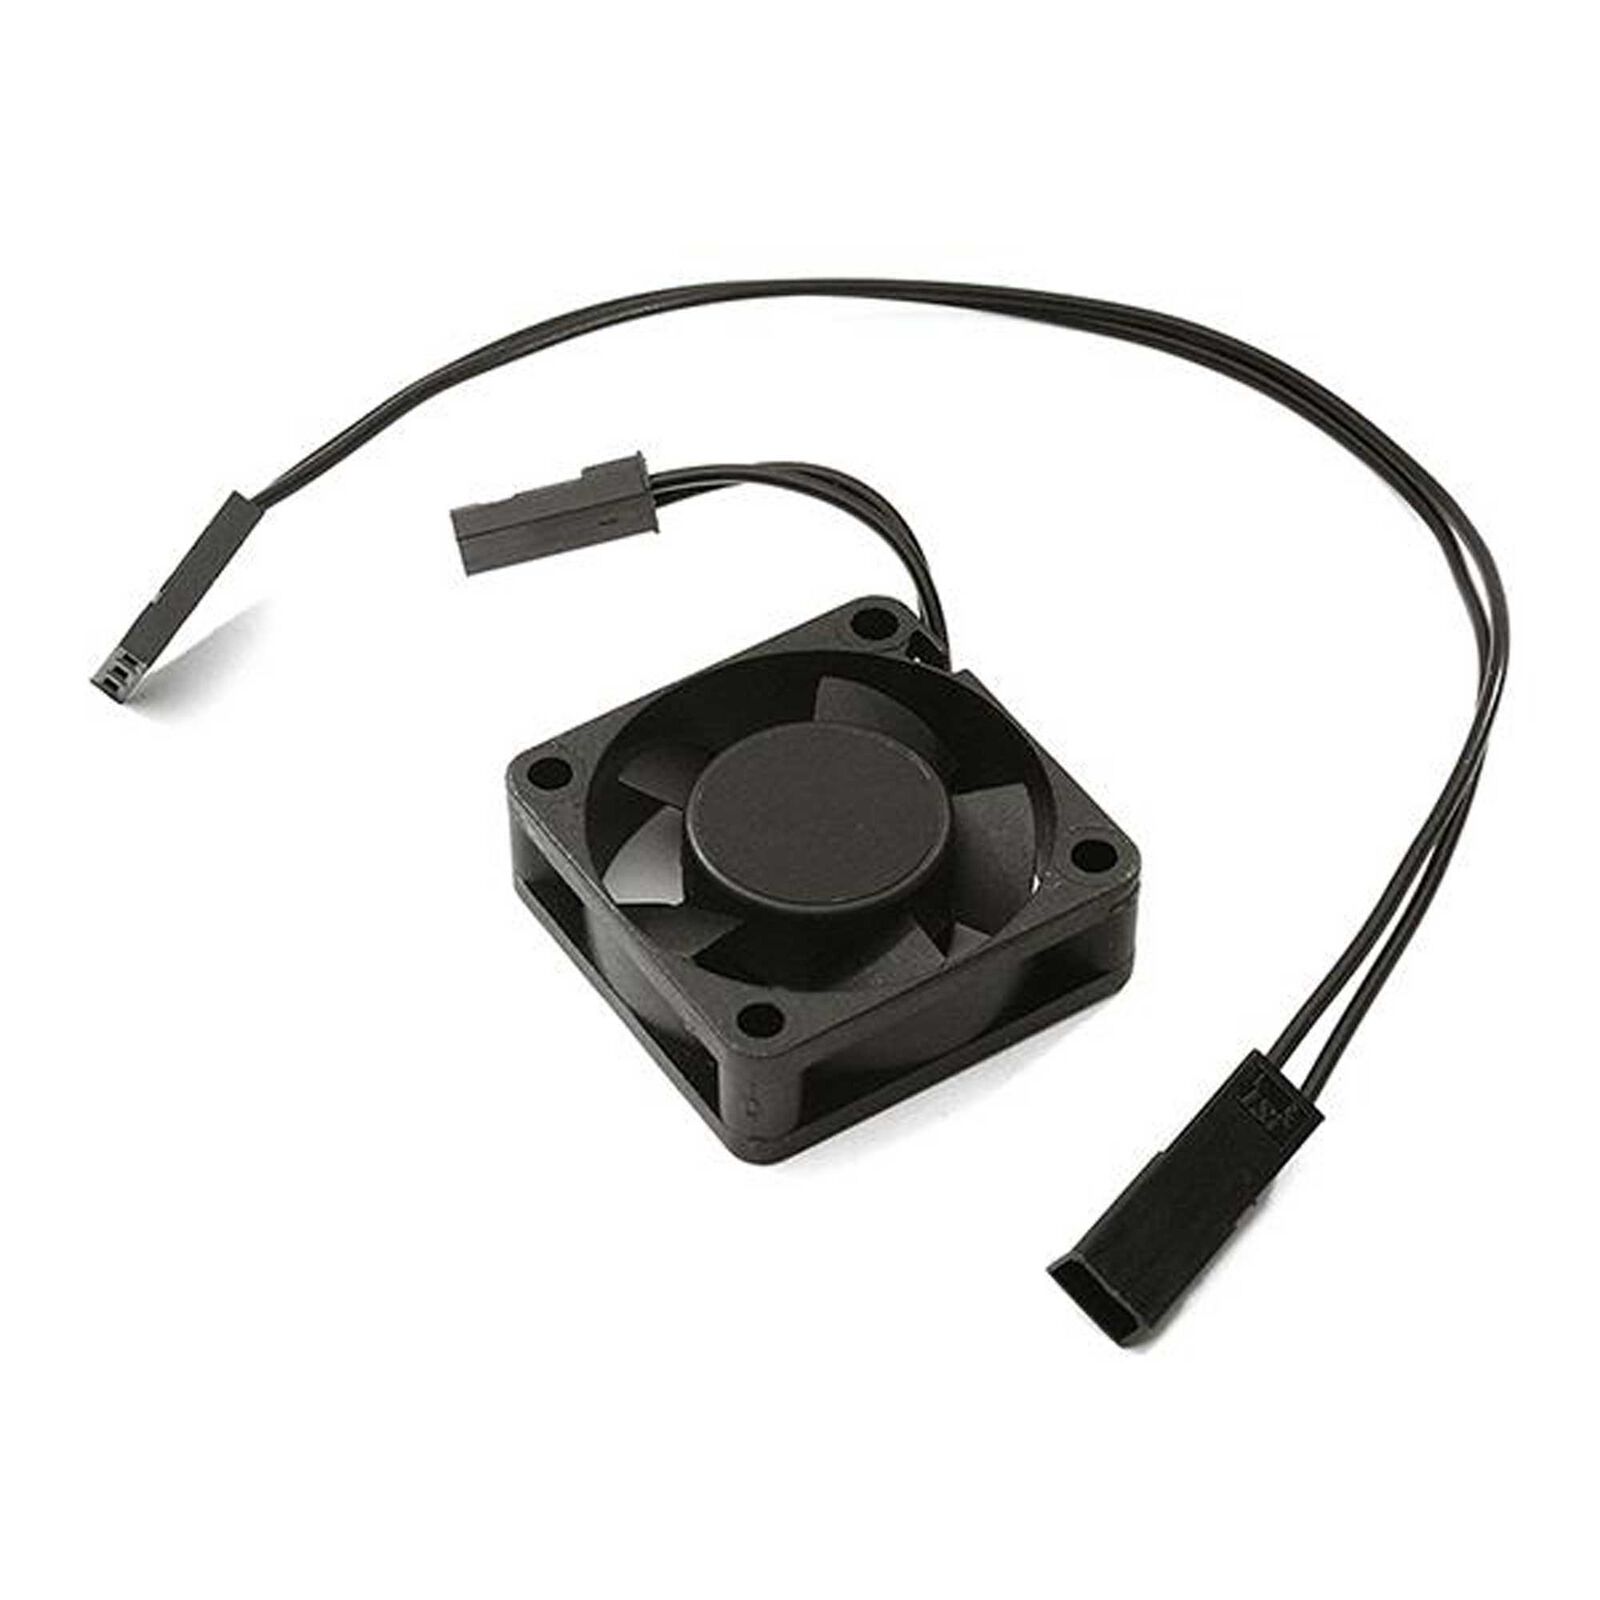 Ultra High Speed 23k RPM Cooling Fan with JST Plug, 30 x 30 x 10mm